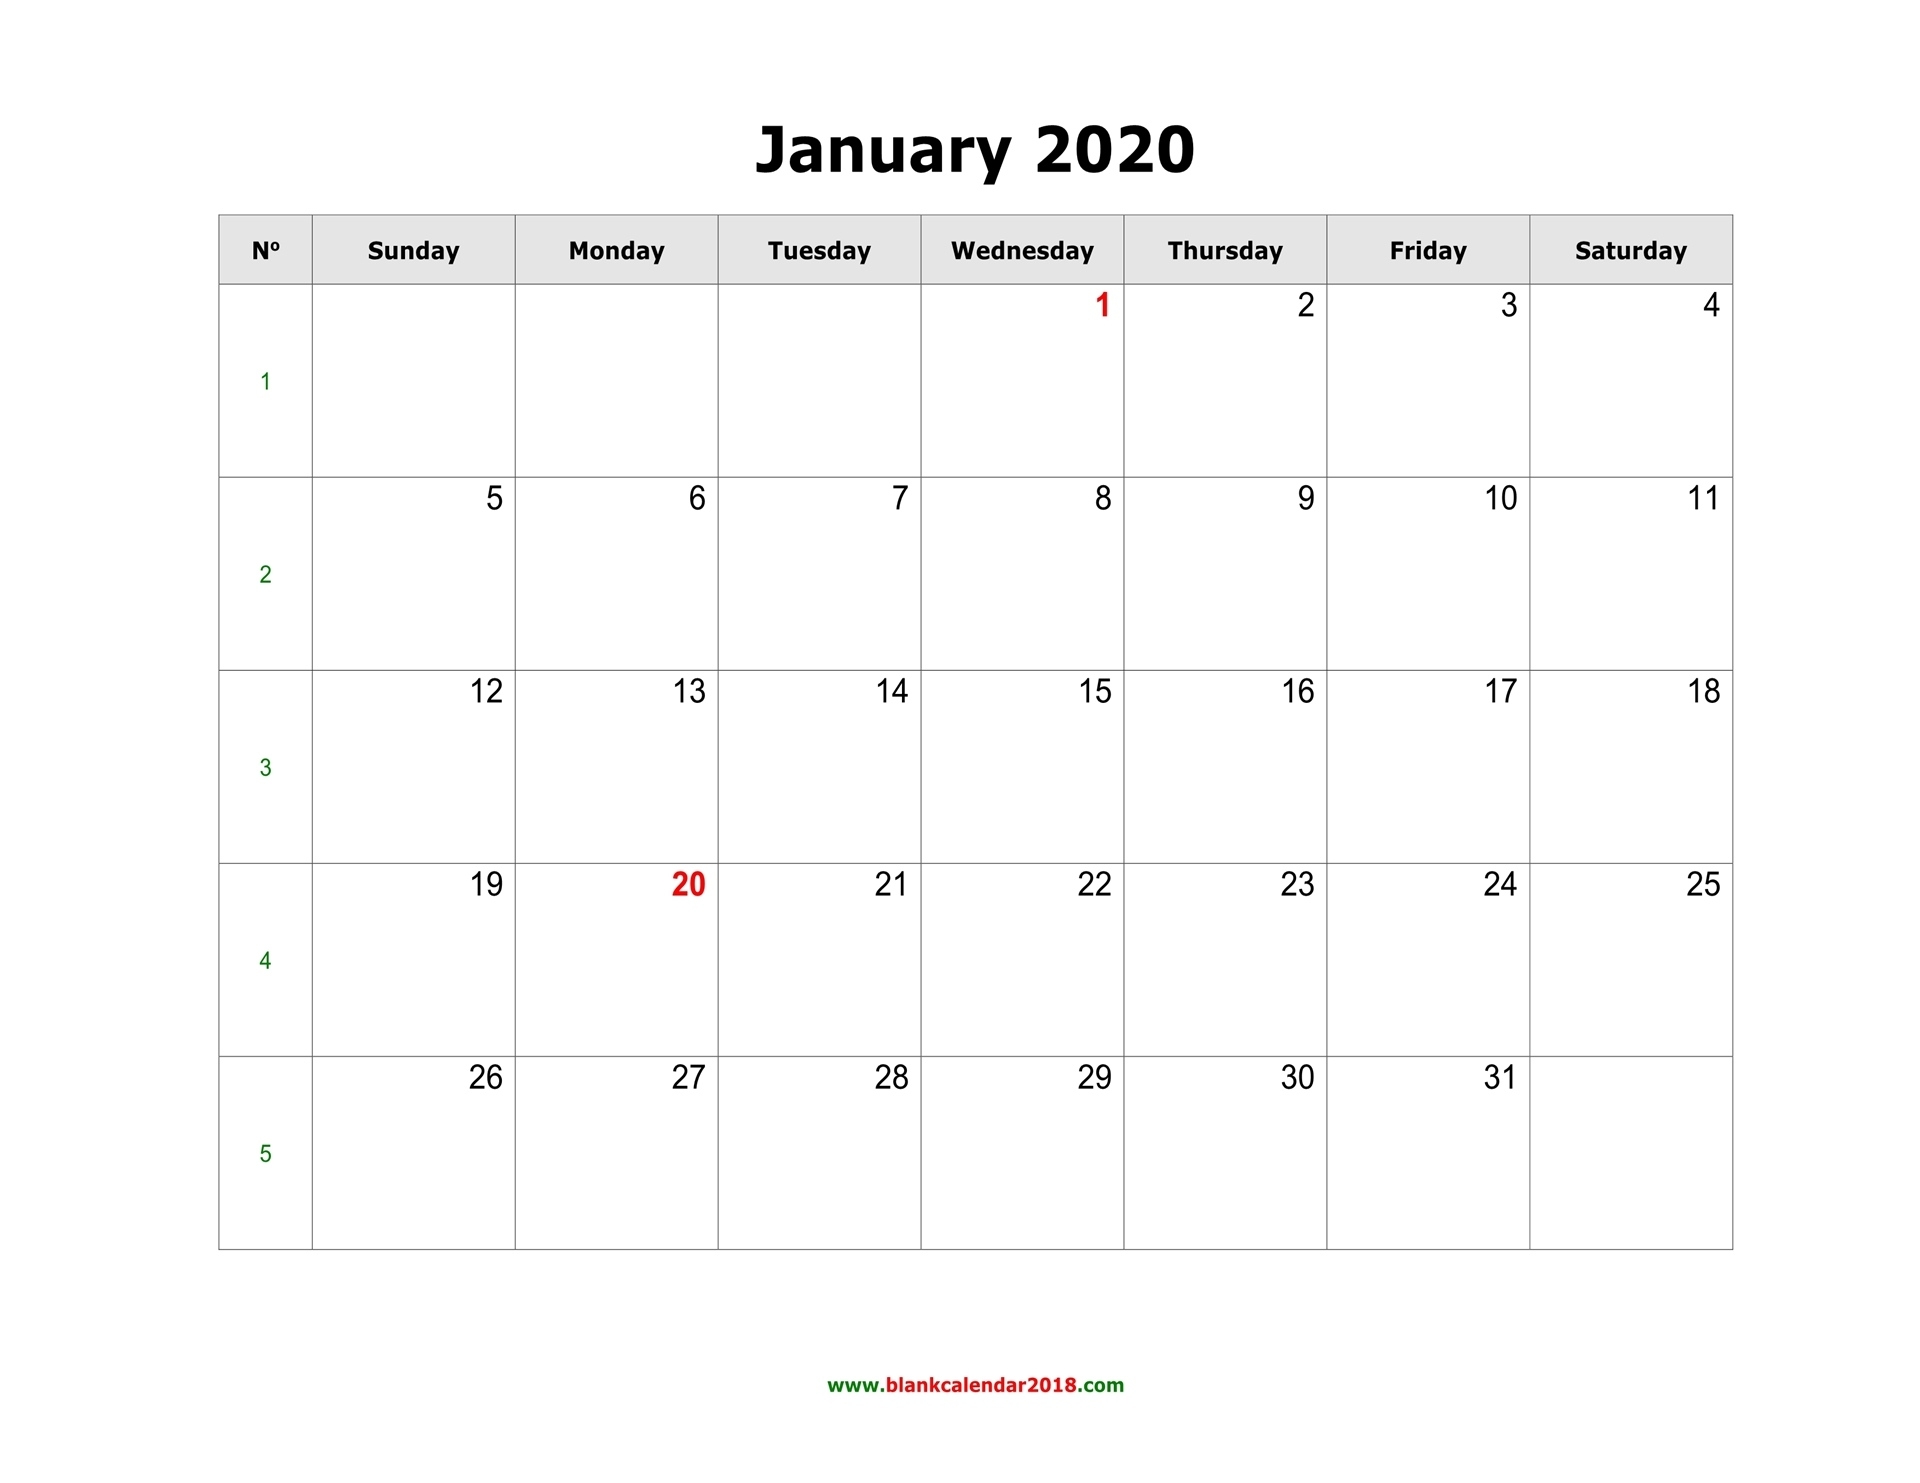 Blank Calendar 2020 Blank Calendars With Days Of The Week Not Numbered